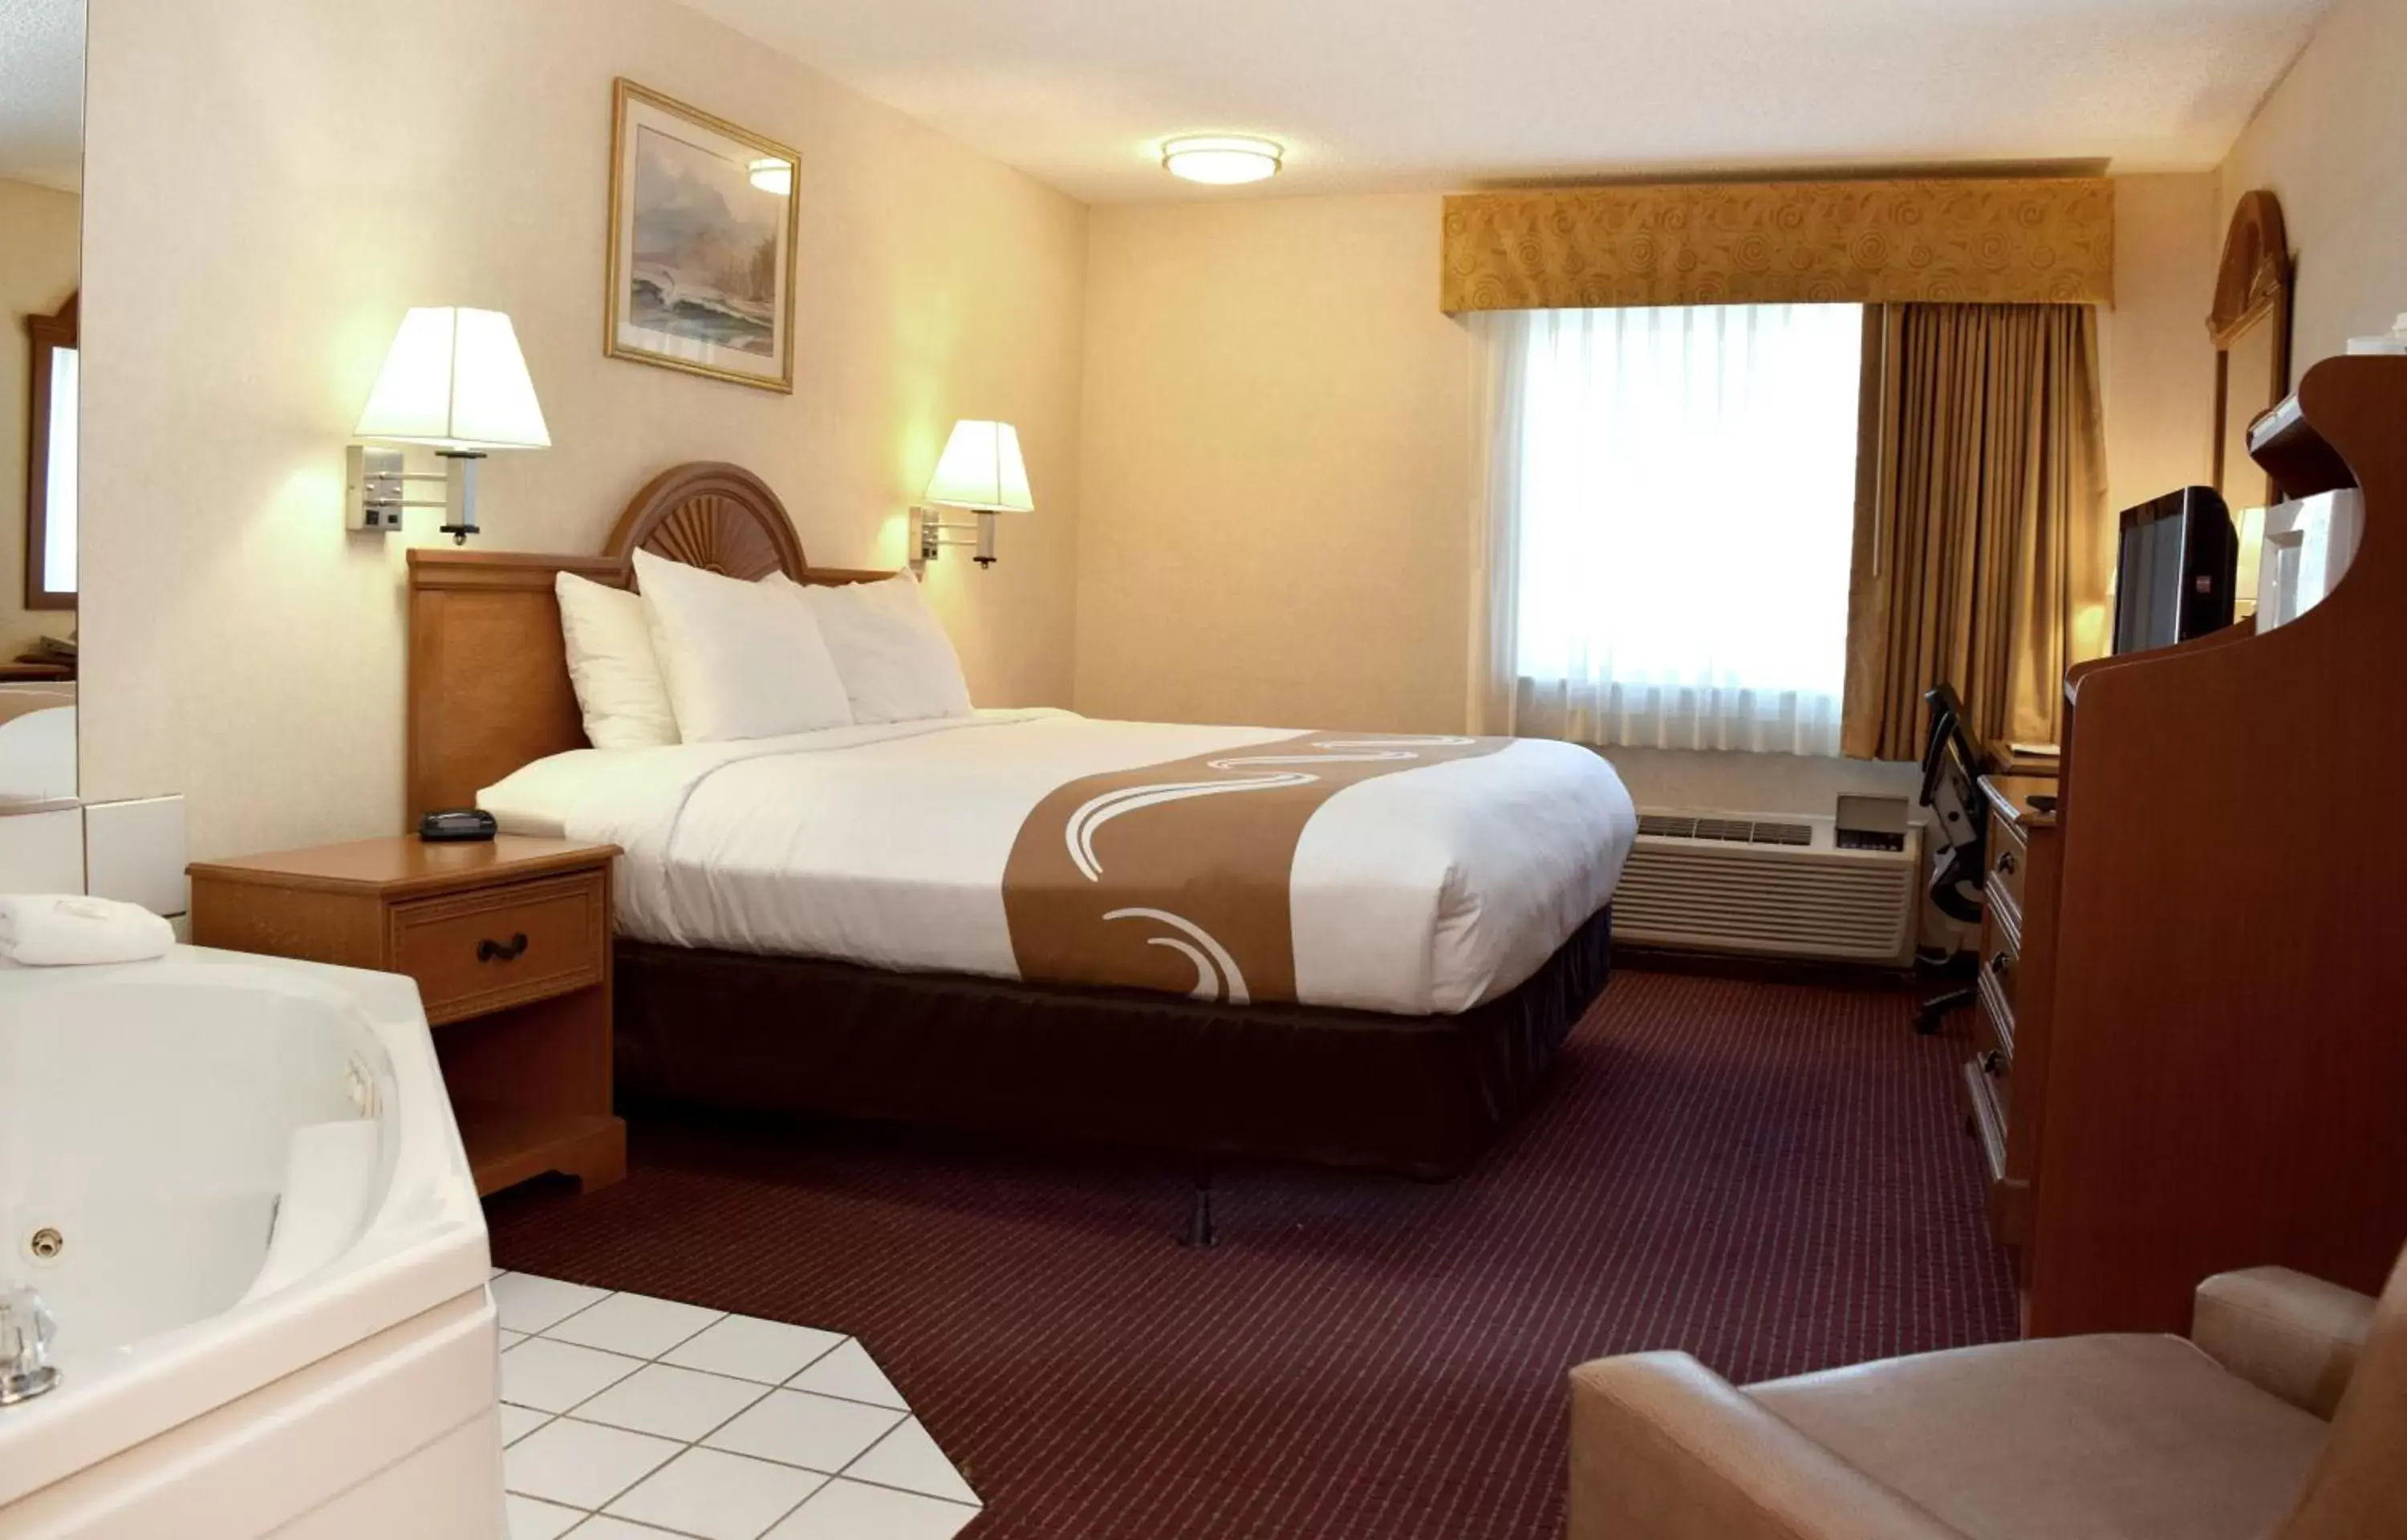 King Room with Accessible Tub - Accessible/Non-Smoking in Quality Inn Louisville - Boulder